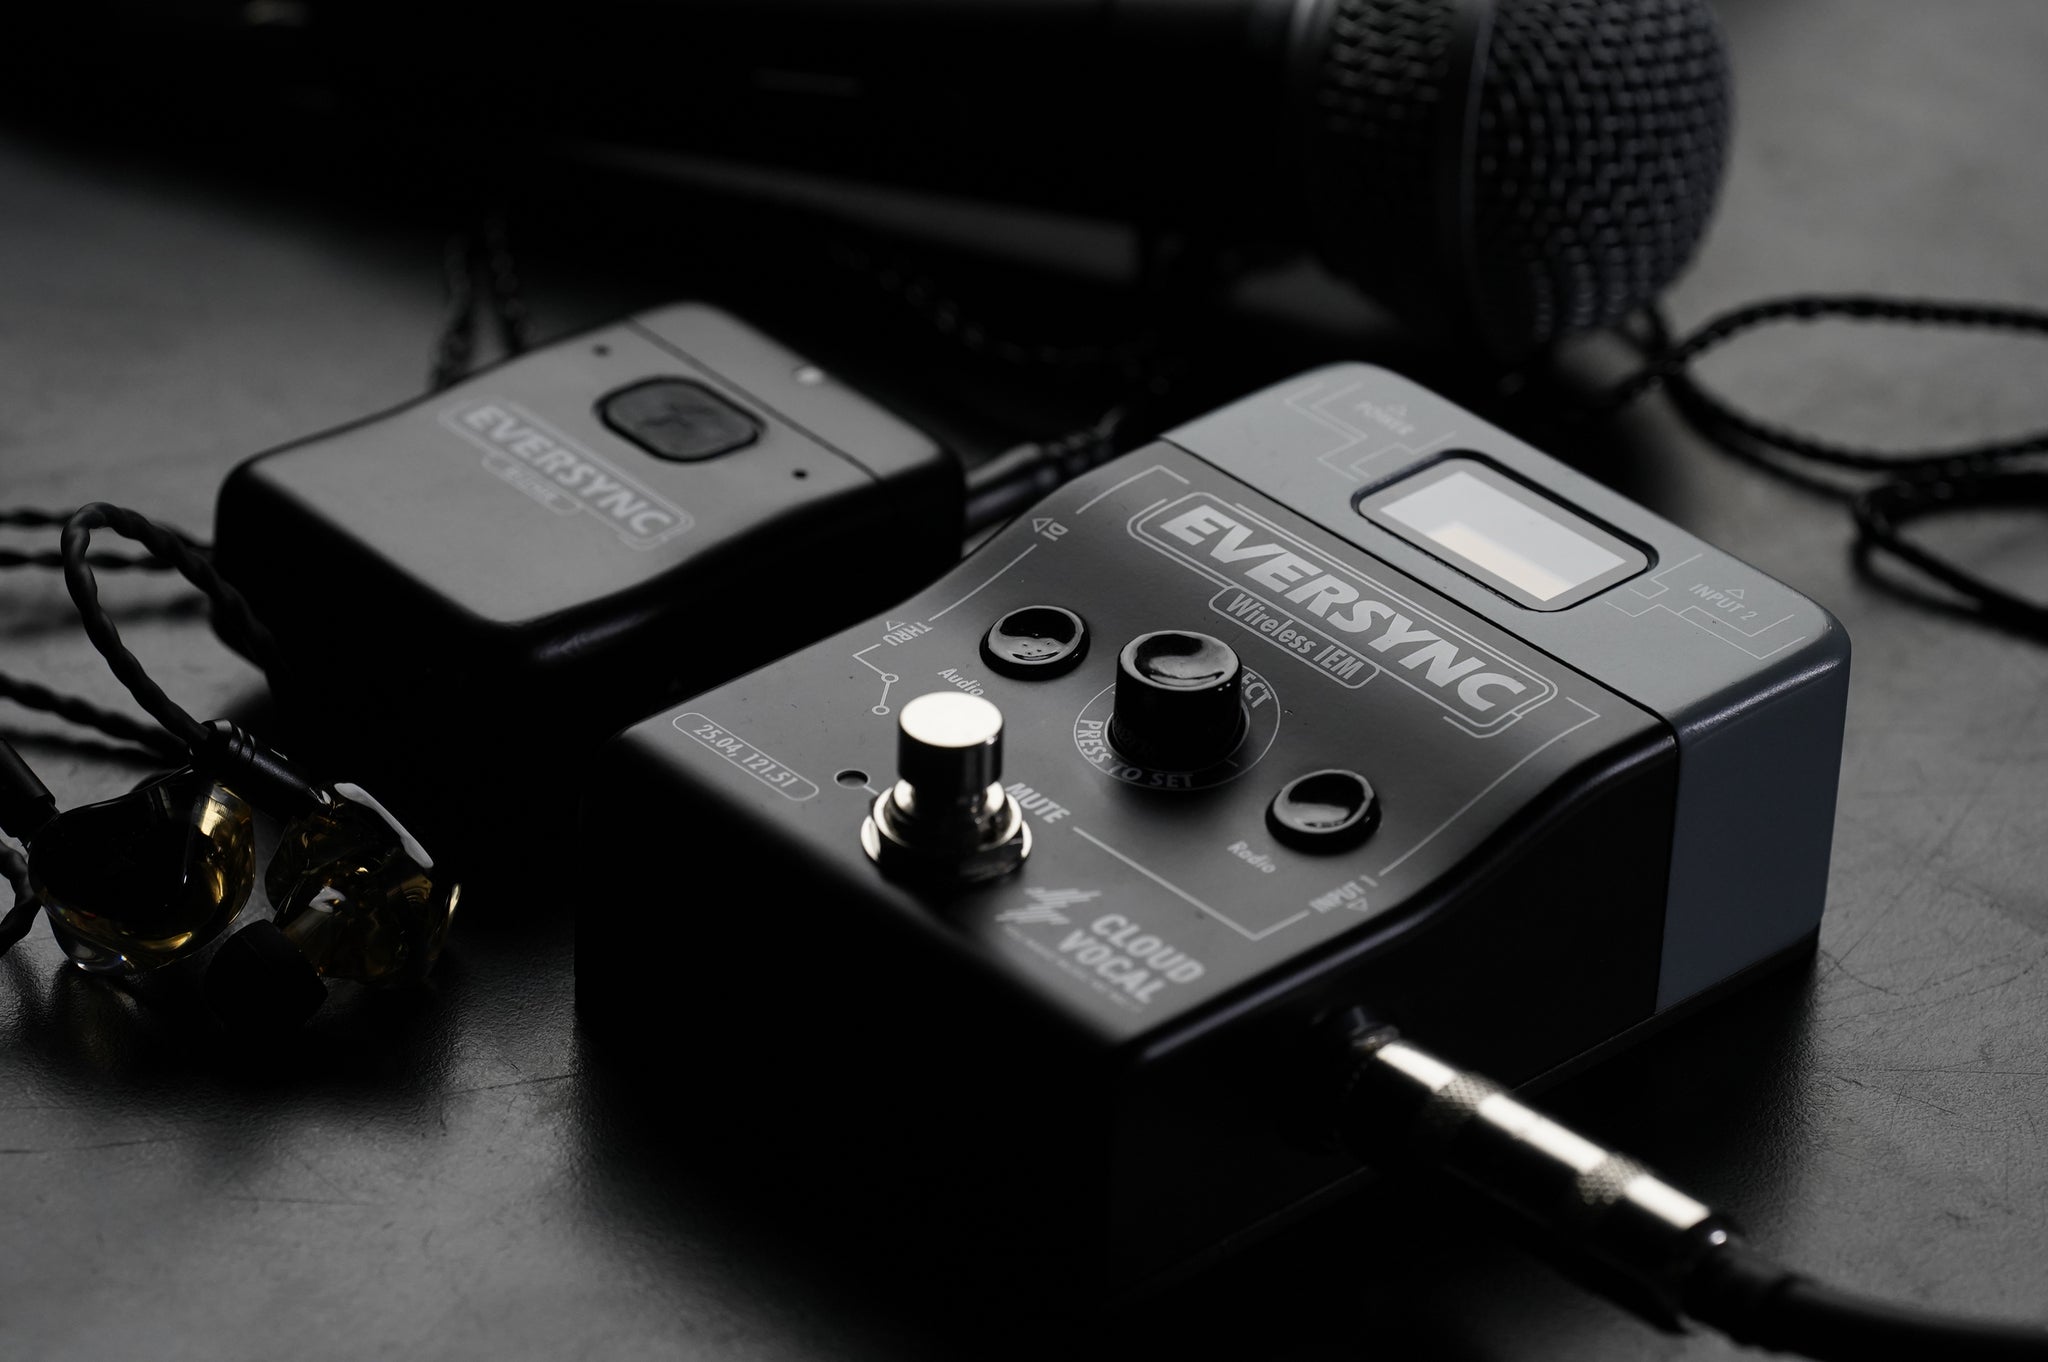 What is an IEM? Some frequently asked questions about EverSync